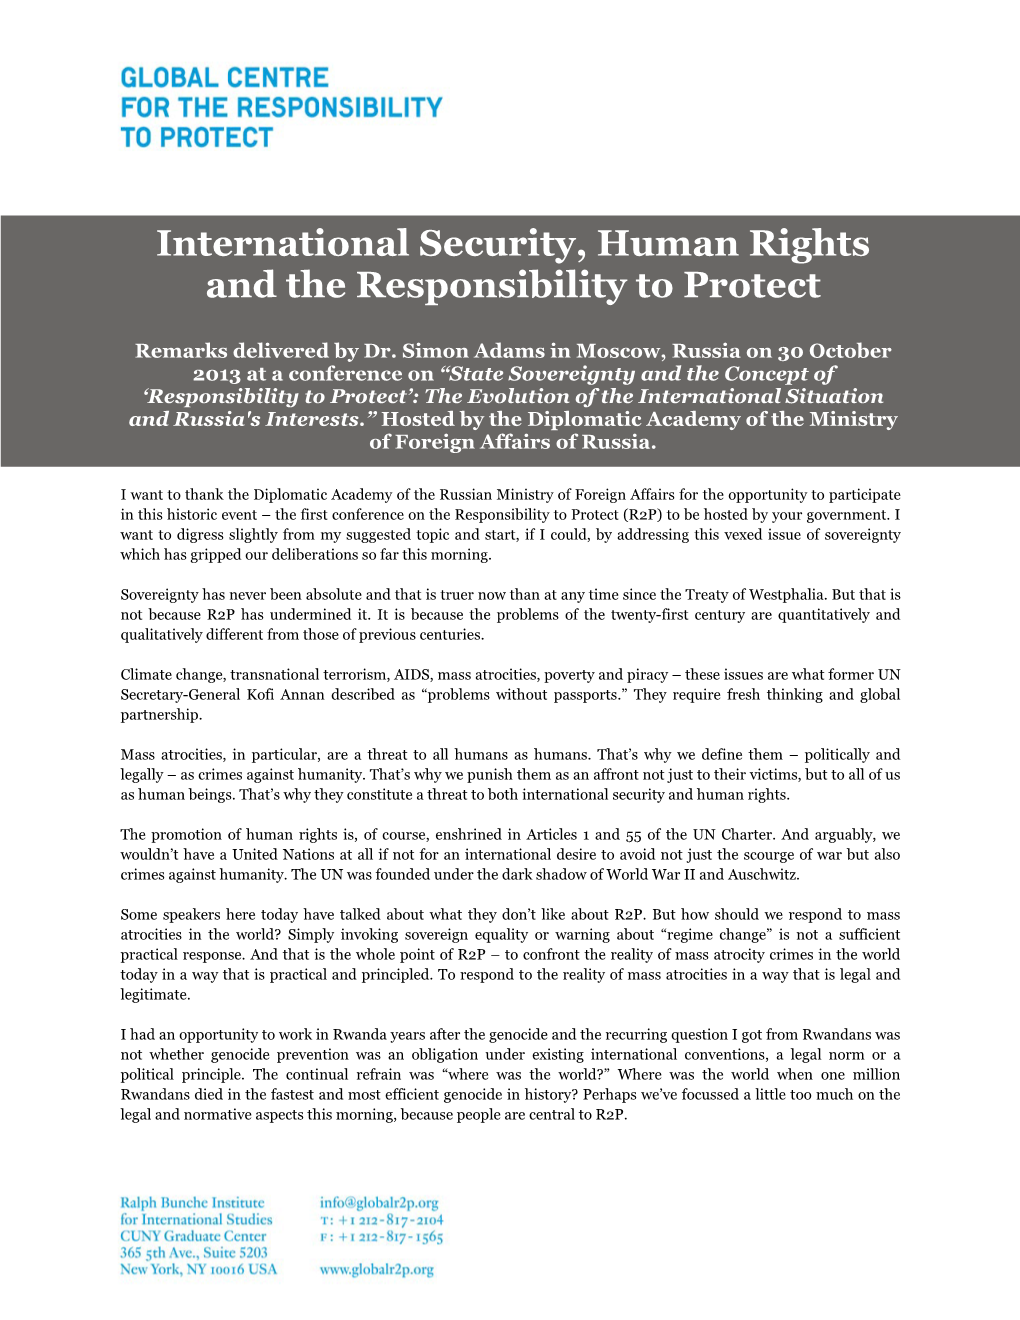 International Security, Human Rights and the Responsibility to Protect